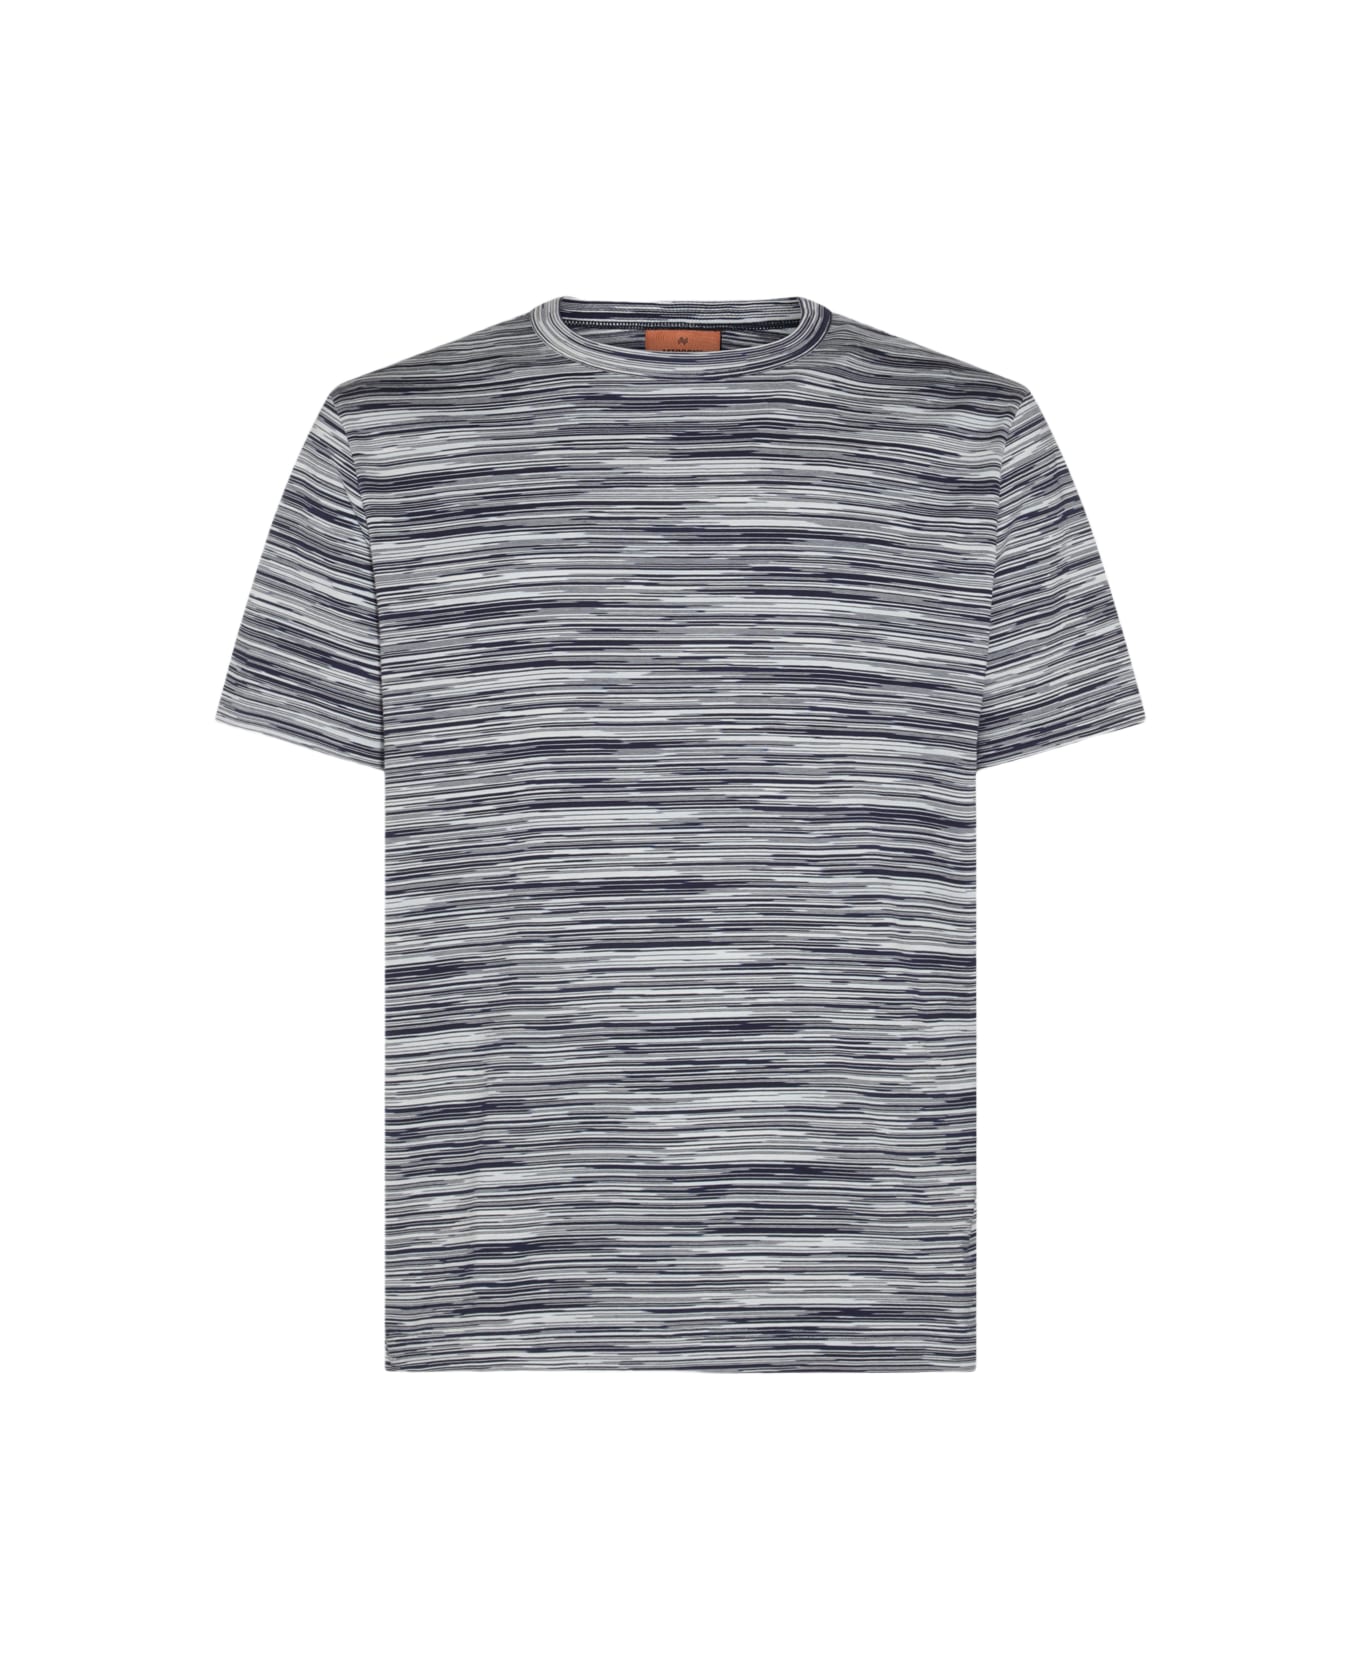 Missoni Multicolor Cotton T-shirt - SPACE DYED NAVY WHITE シャツ